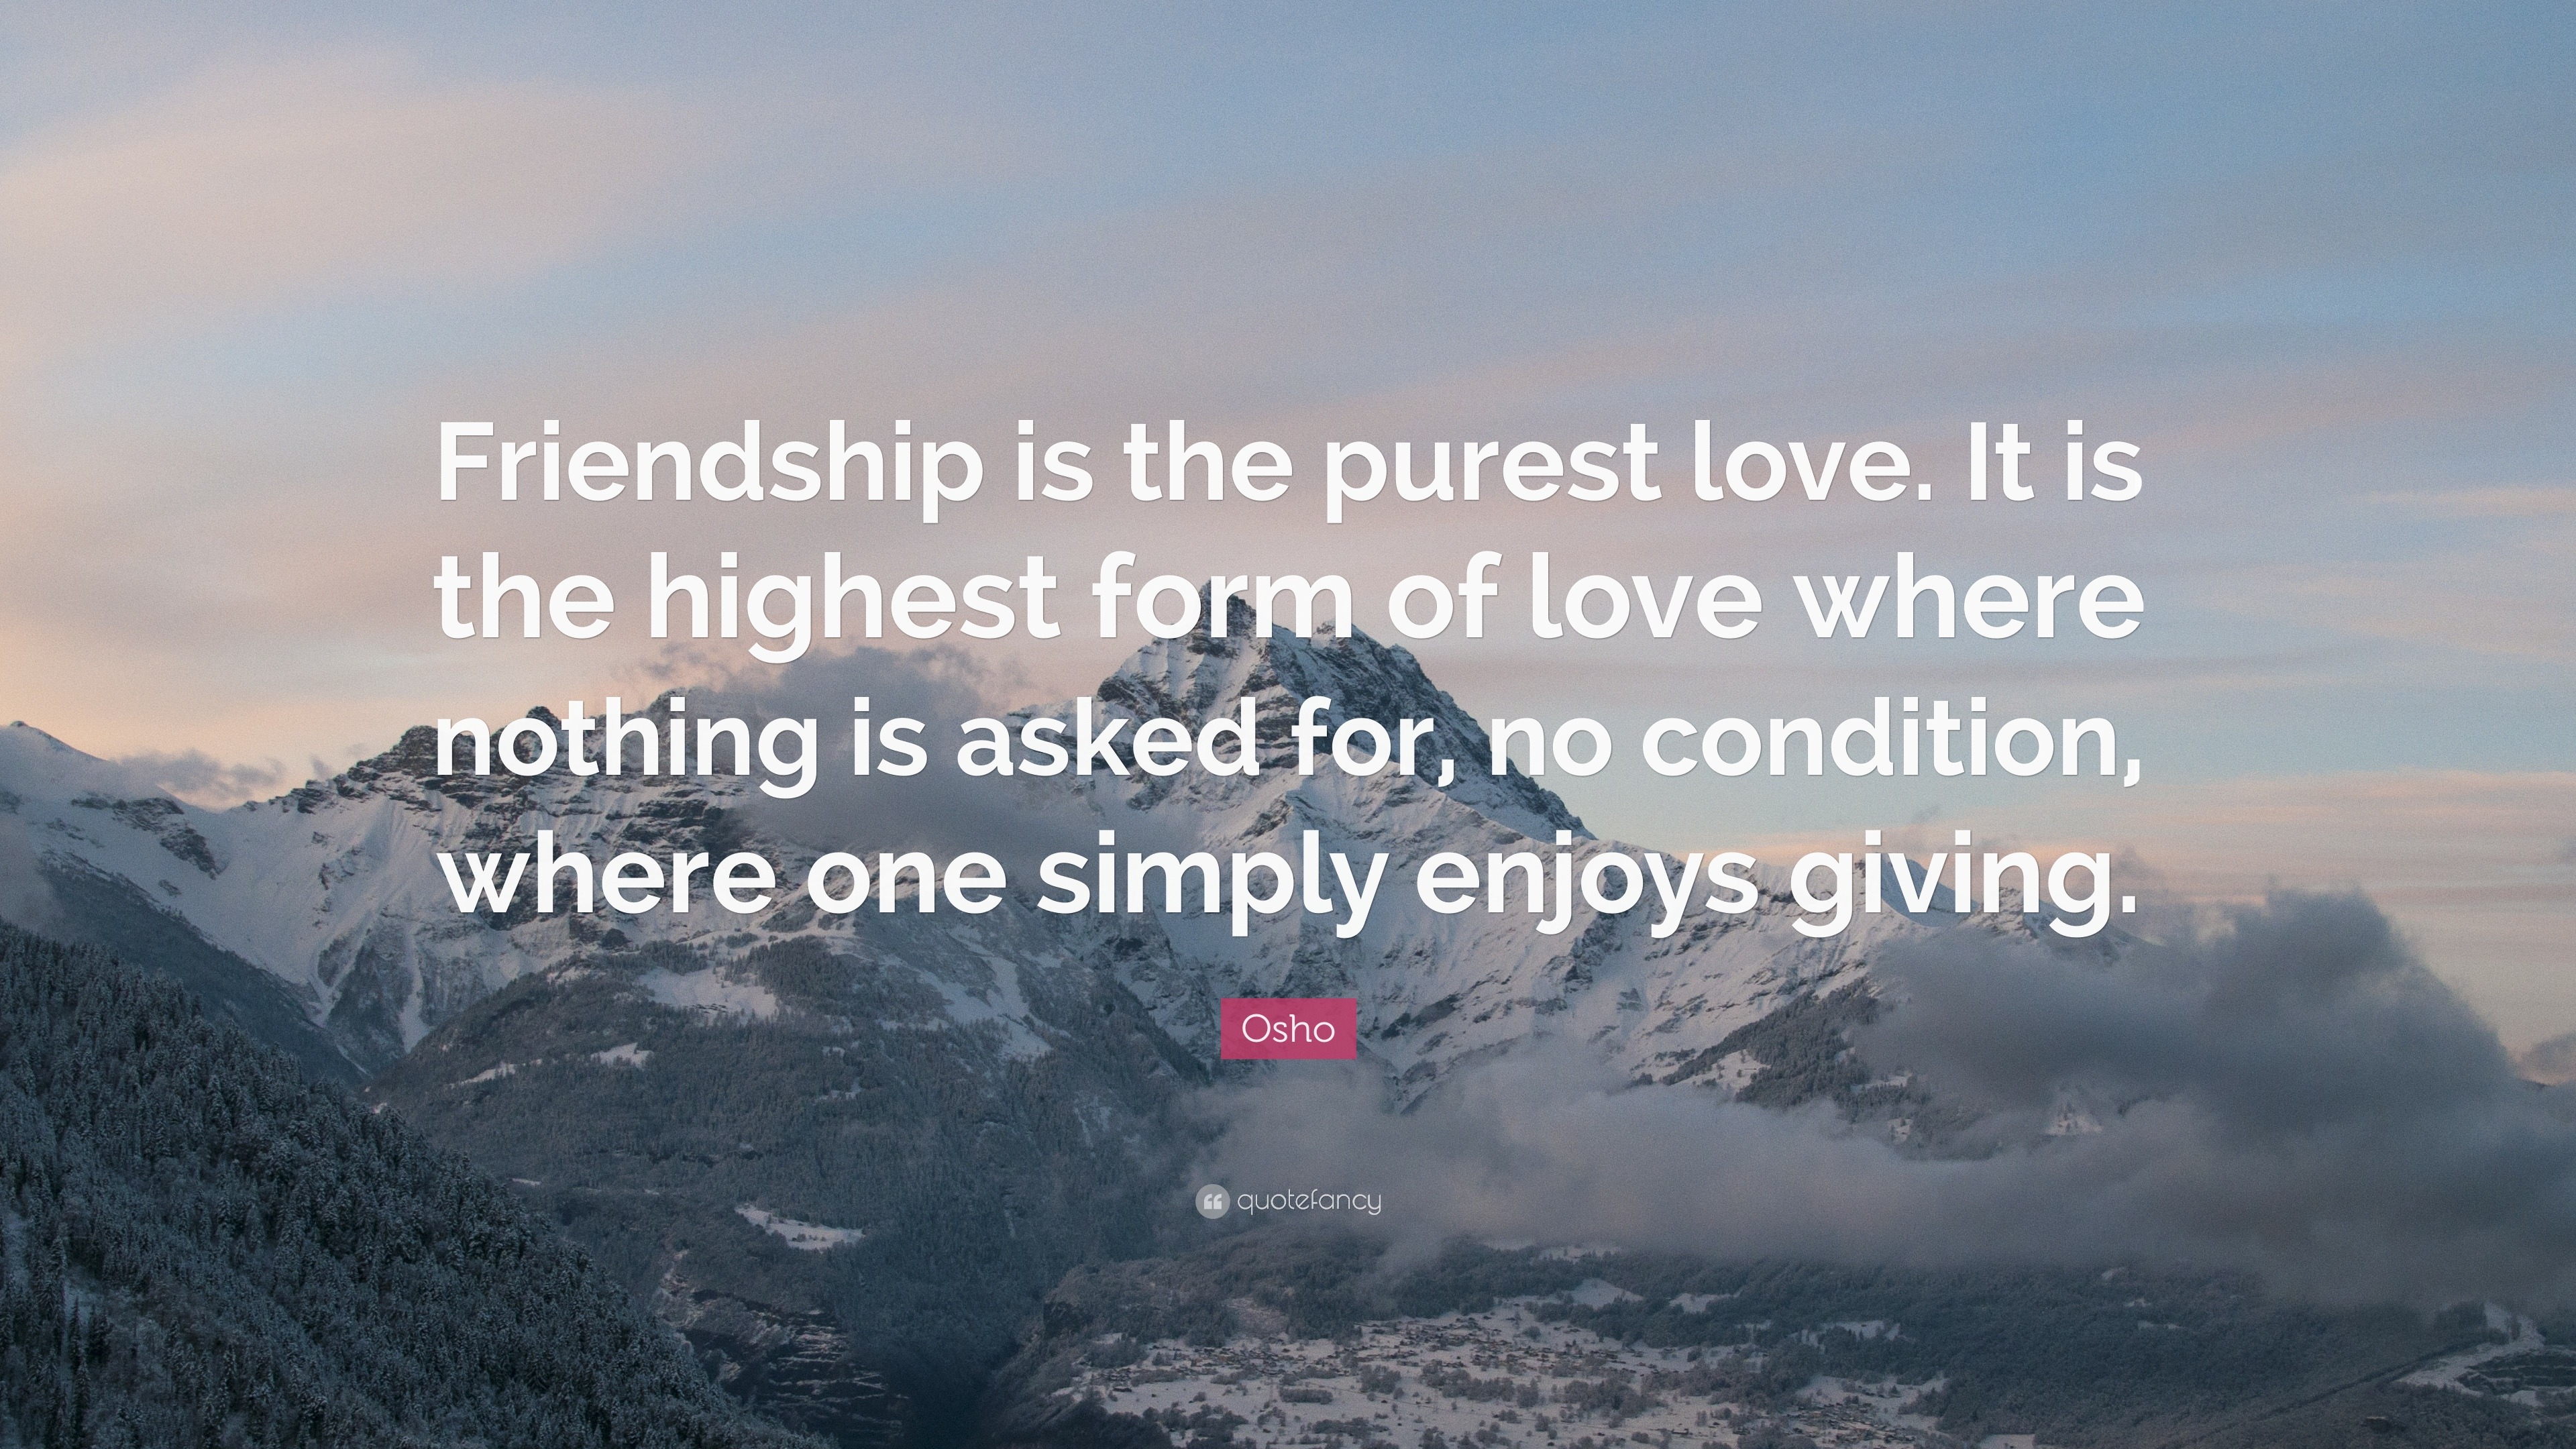 osho-quote-friendship-is-the-purest-love-it-is-the-highest-form-of